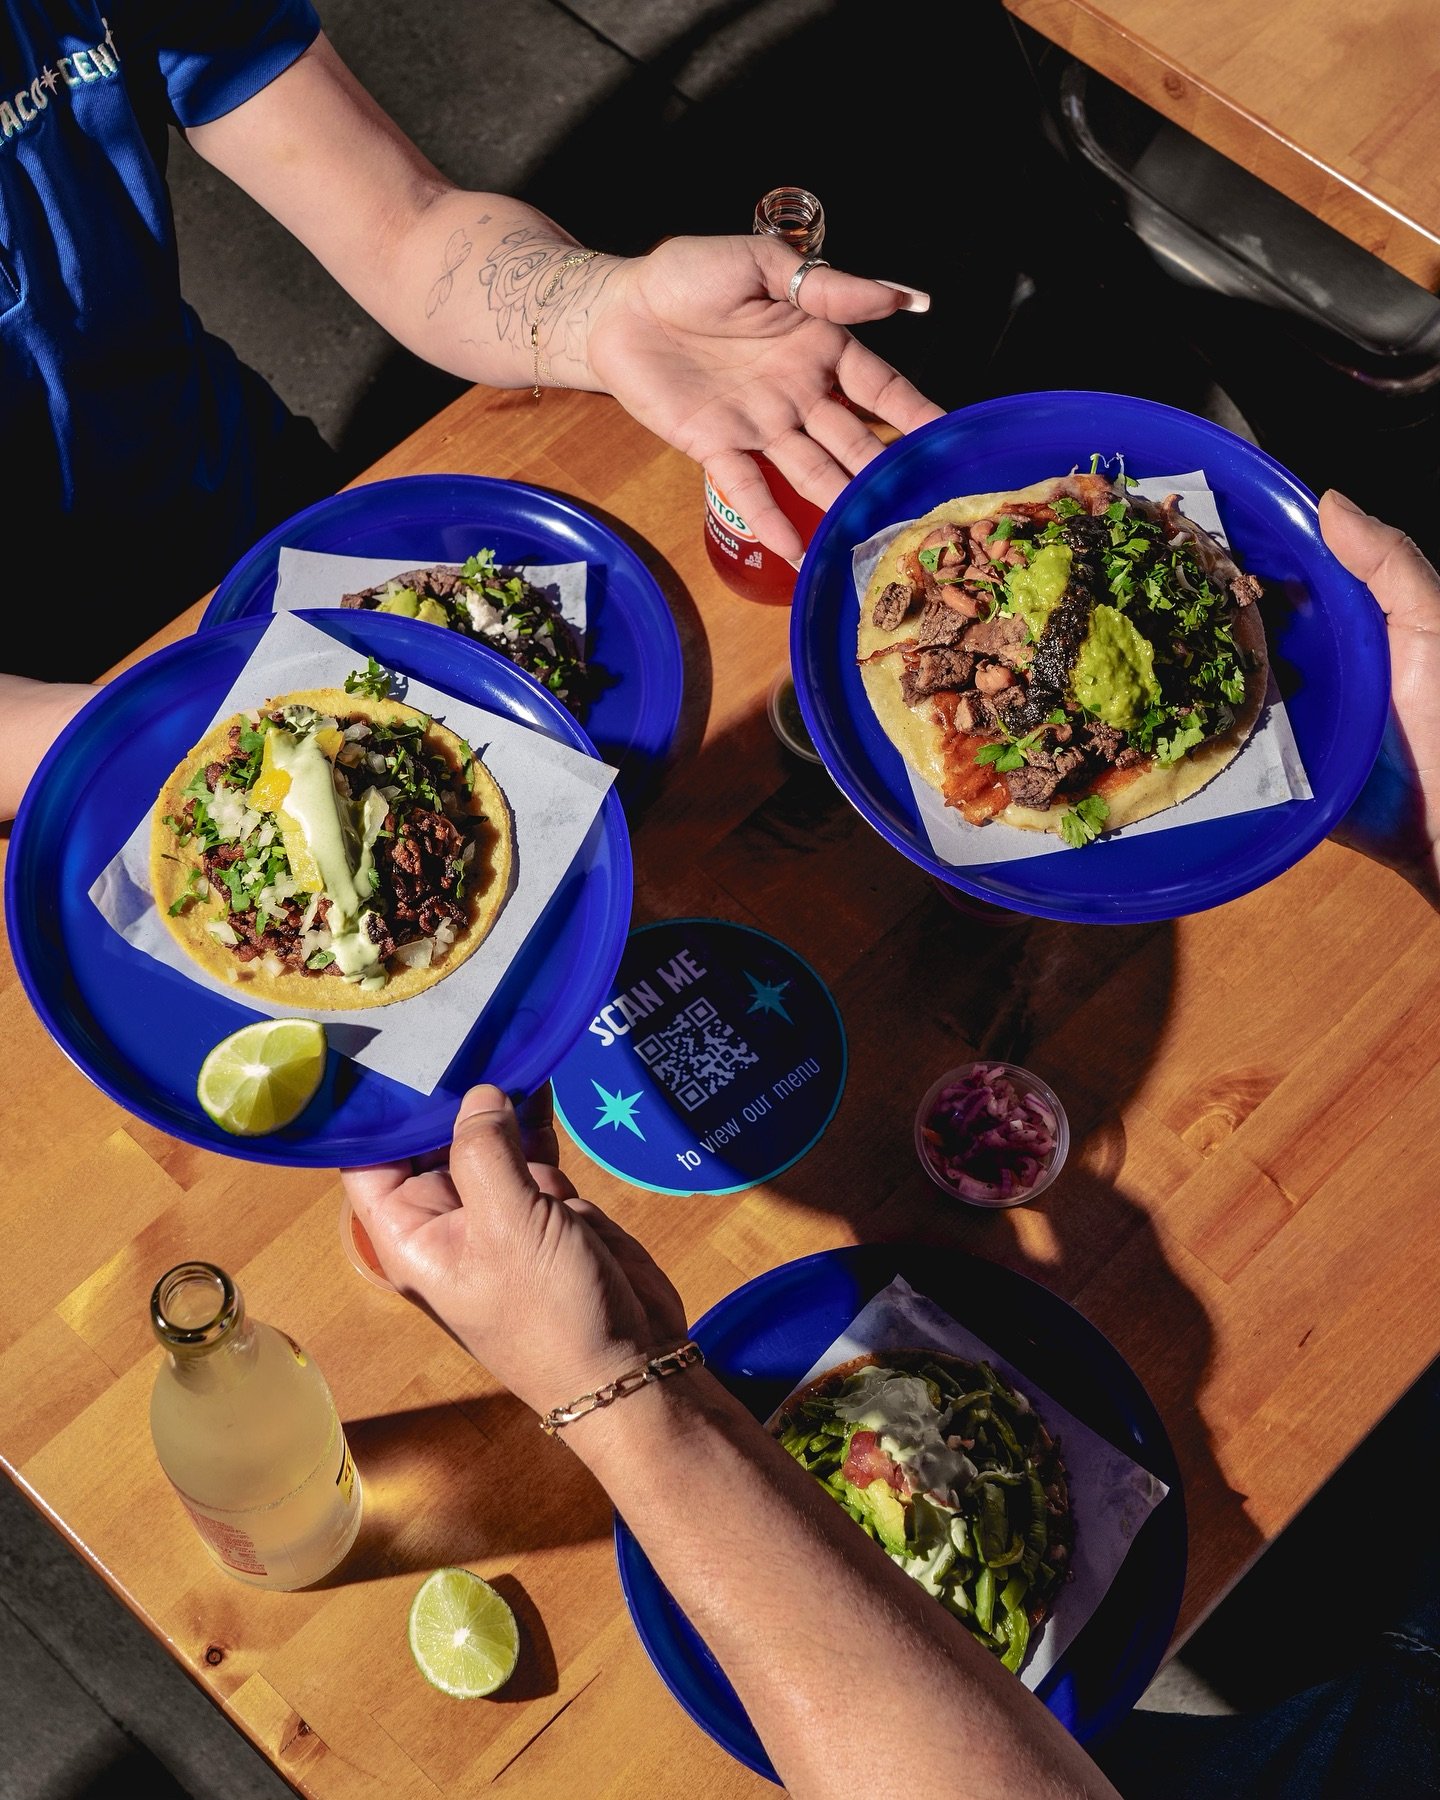 Happy Taco Tuesday! 🌮 Enjoy some delicious tacos with your friends and family today! 💙

Visit Taco Centro, located in Downtown San Diego&rsquo;s Gaslamp Quarter!

📍 539 Island Ave San Diego, CA

#tacocentrosd #tacotimesd 
&bull;
&bull;
#besttacos 